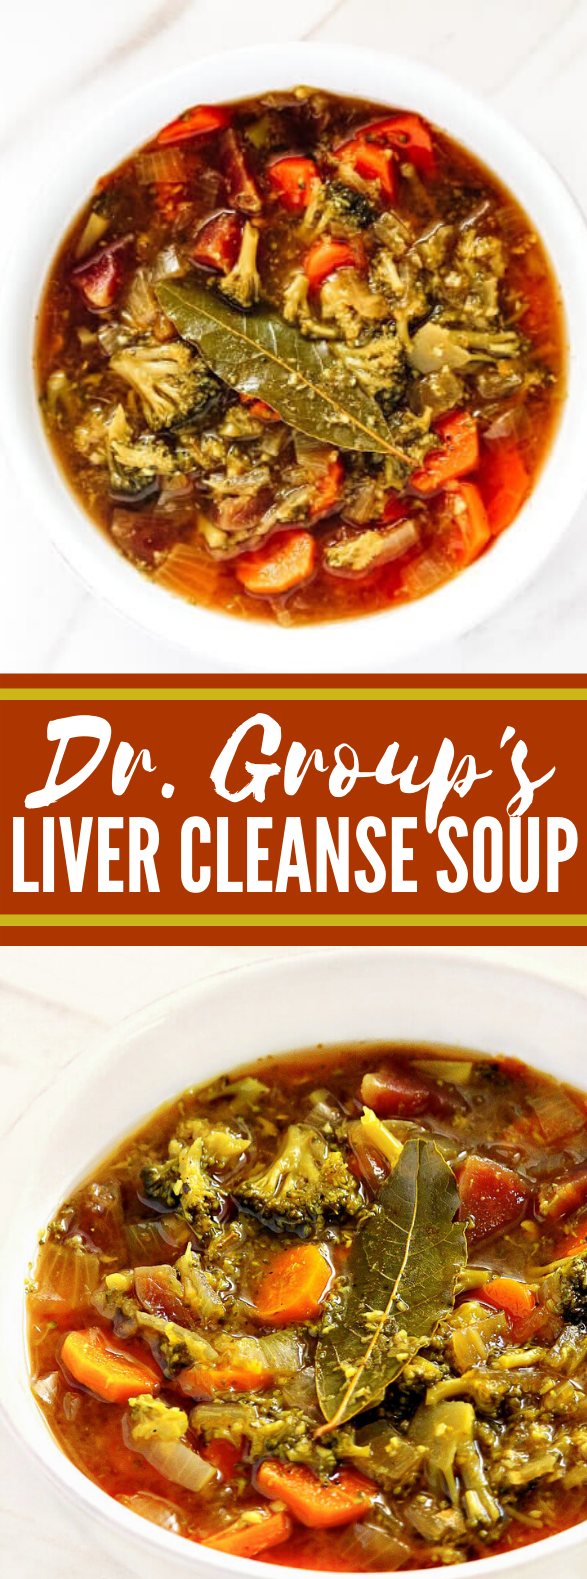 Dr. Group's Liver Cleanse Soup #vegetarian #ketofriendly